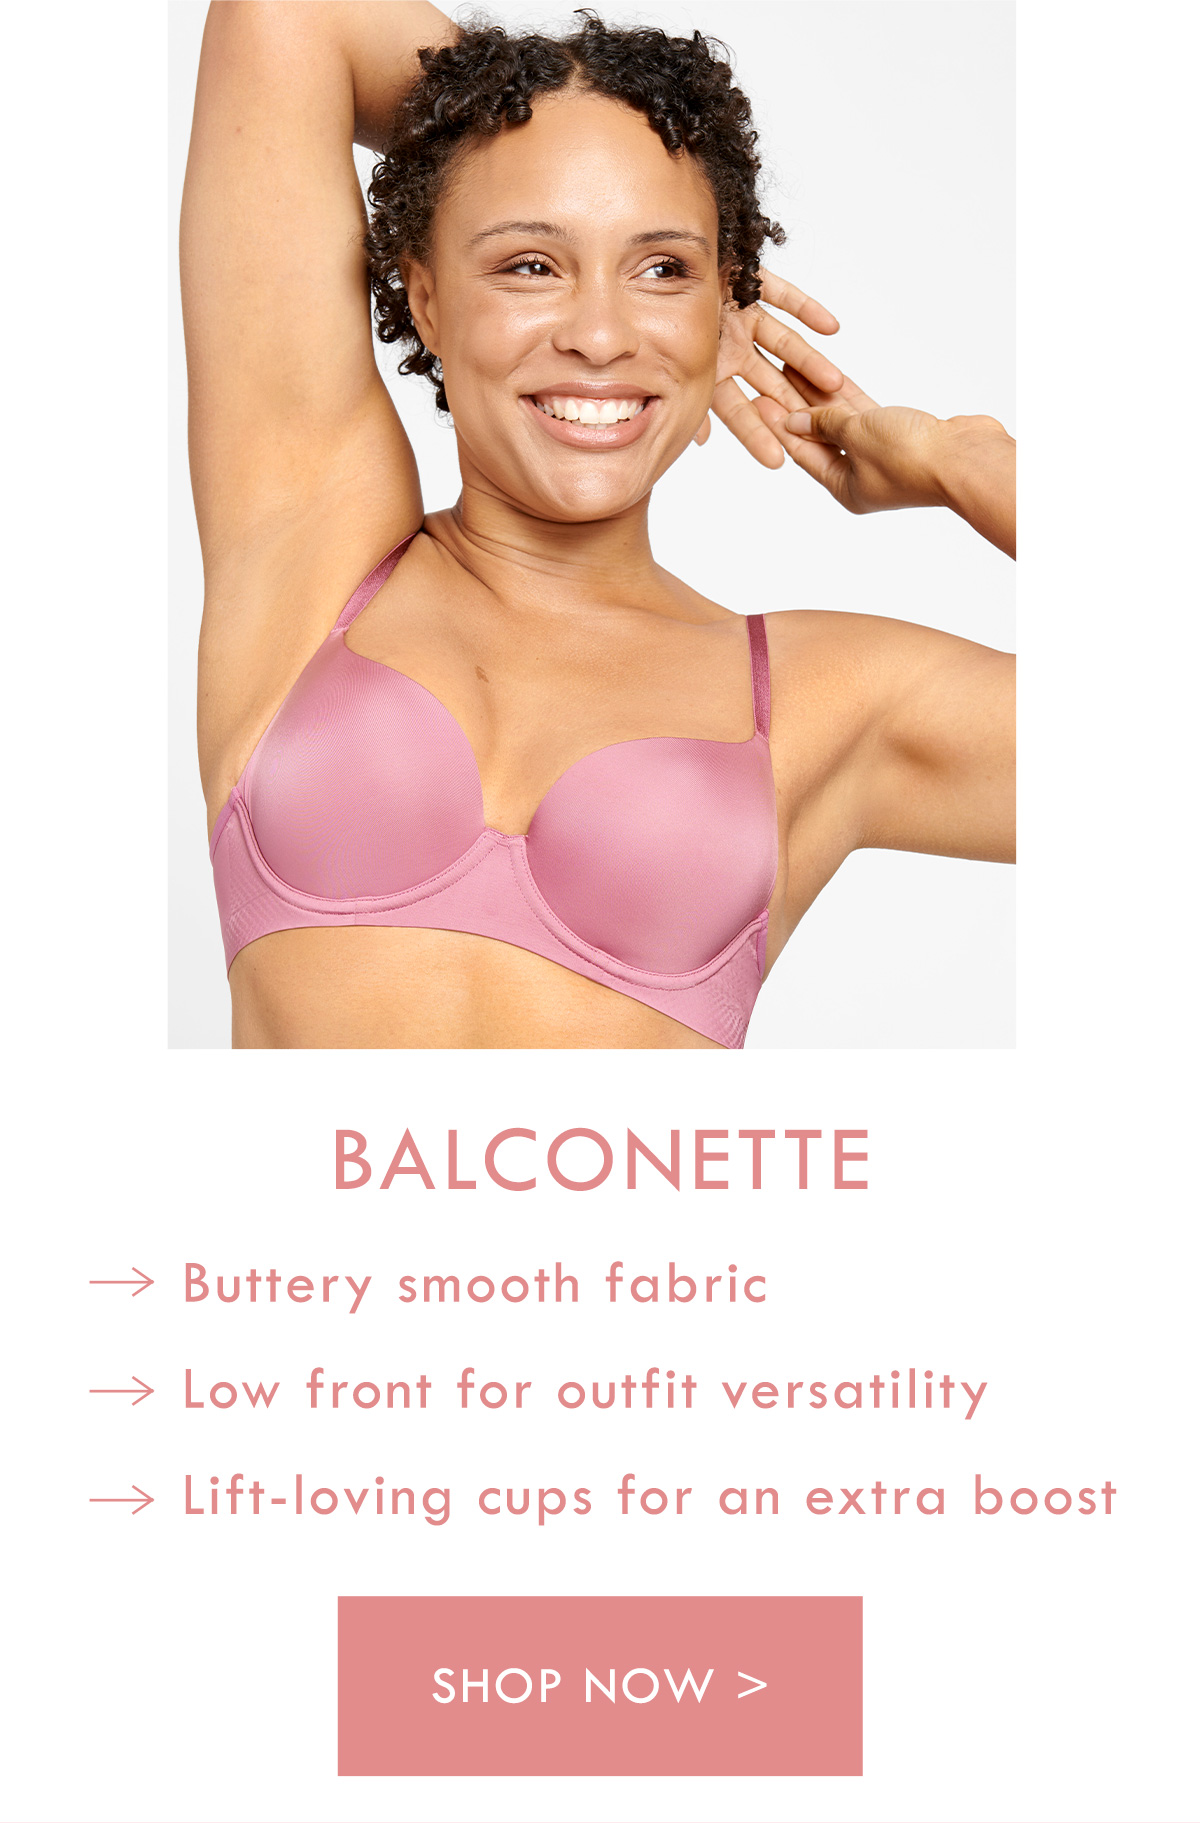 Balconette. Buttery smooth fabric. Low front for outfit versatility. Lift-loving cups for an extra boost. Shop now.